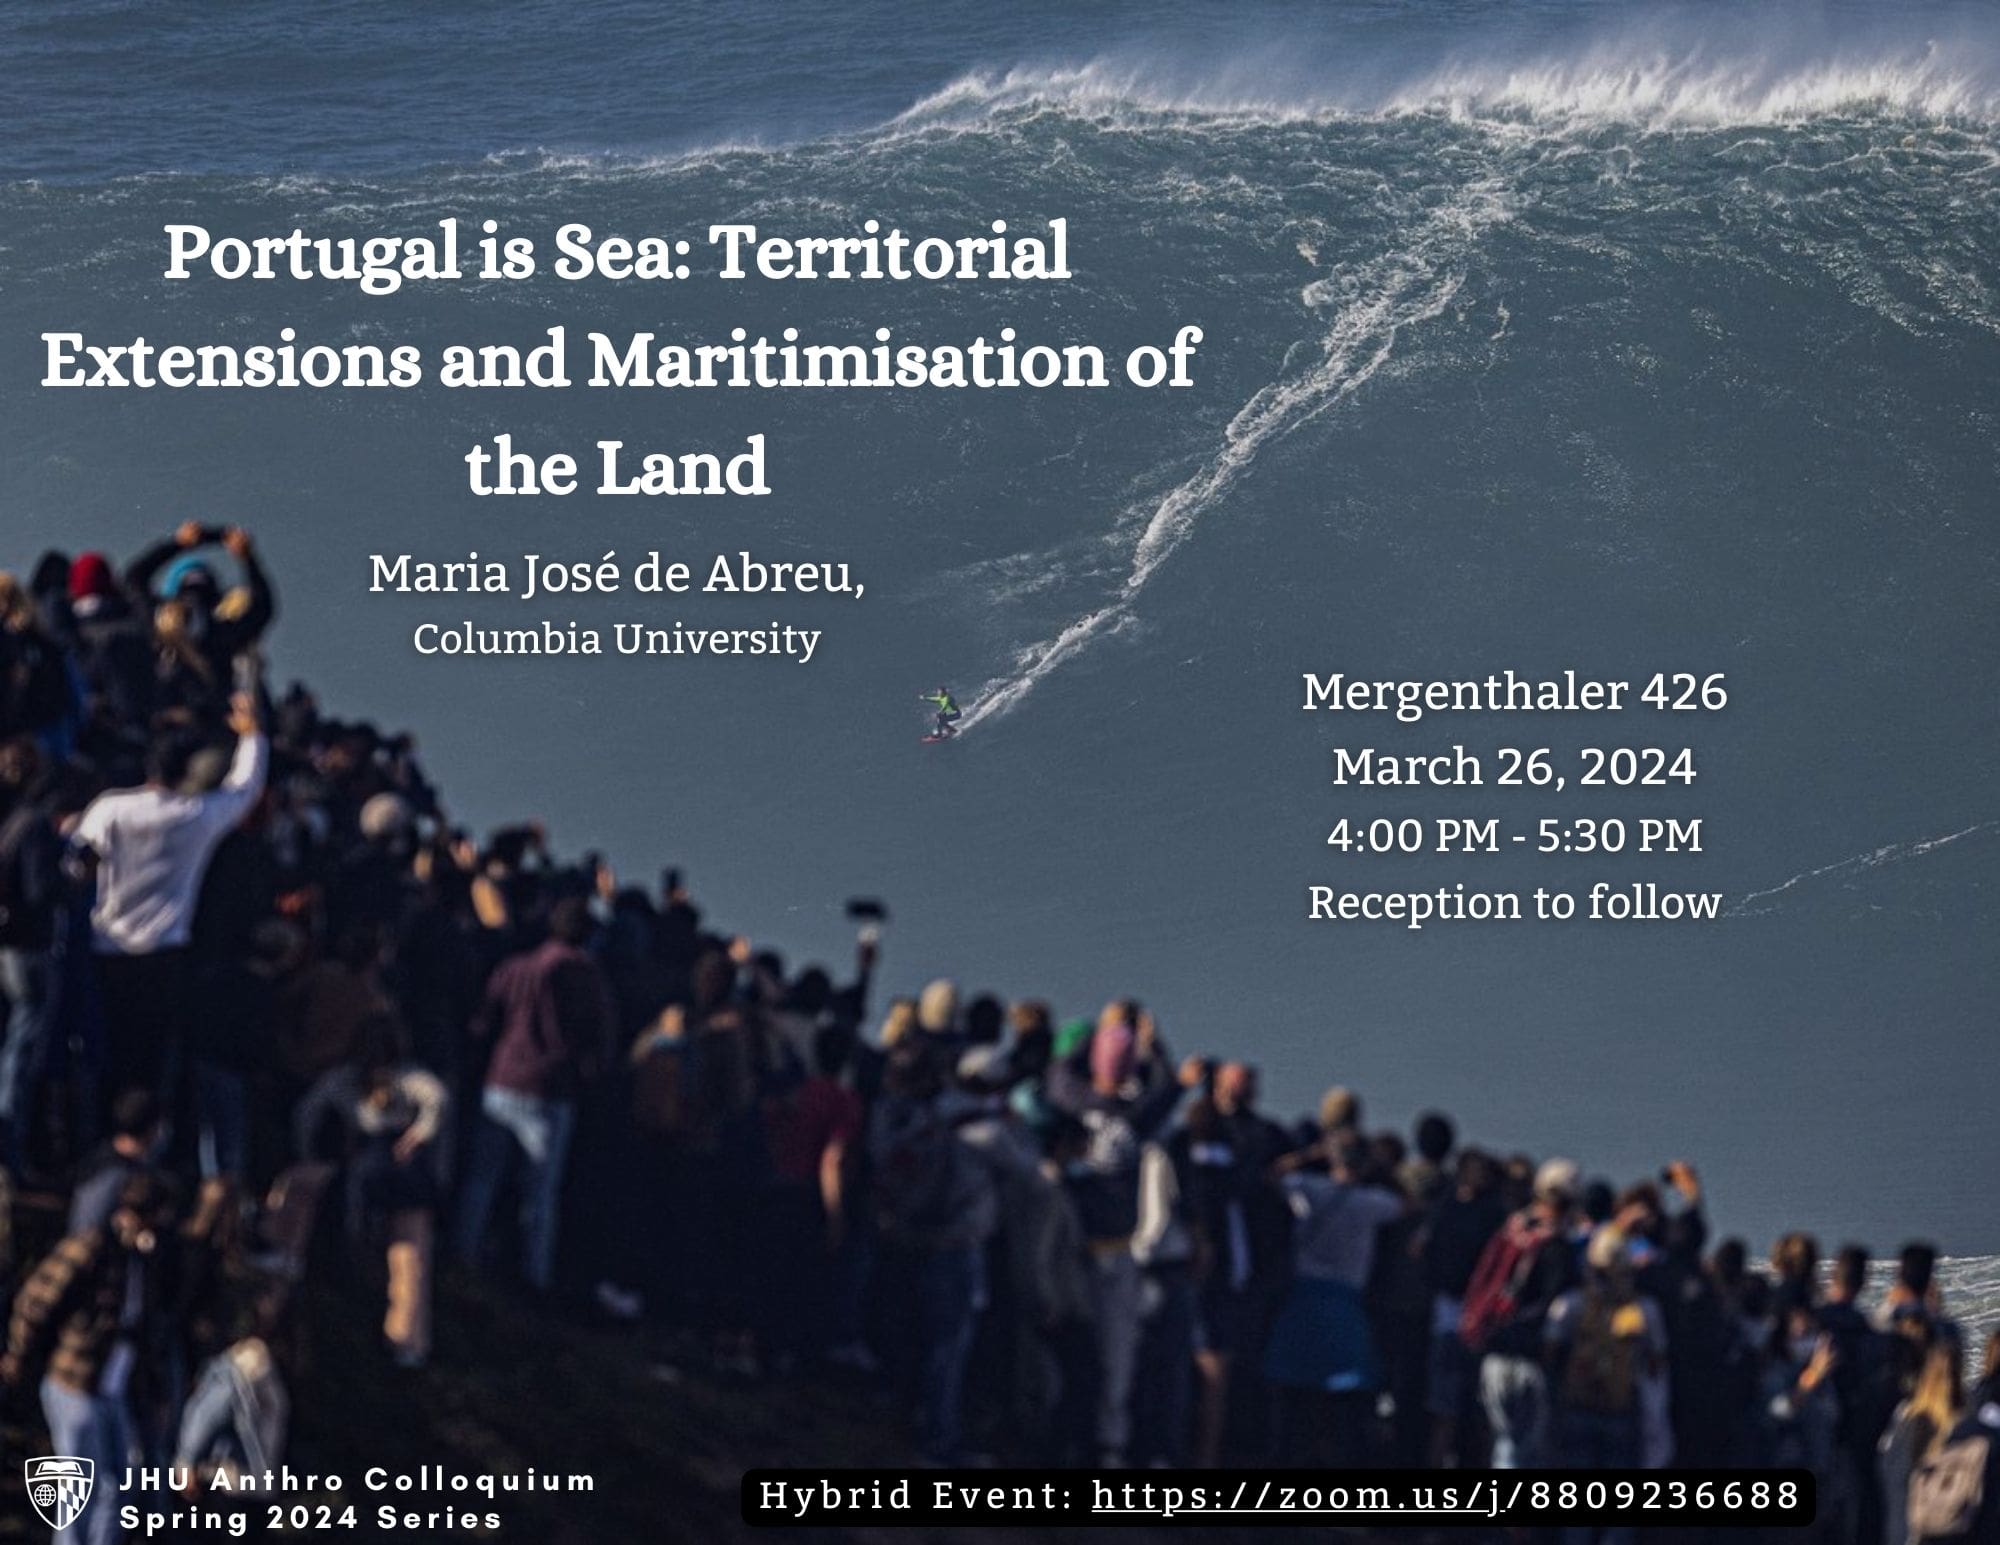 Flyer for Portugal is Sea: Territorial Extensions and Maritimisation of the Land, a colloquium by Maria Jose de Abreu. Image depicts a large group of people facing a massive wave.